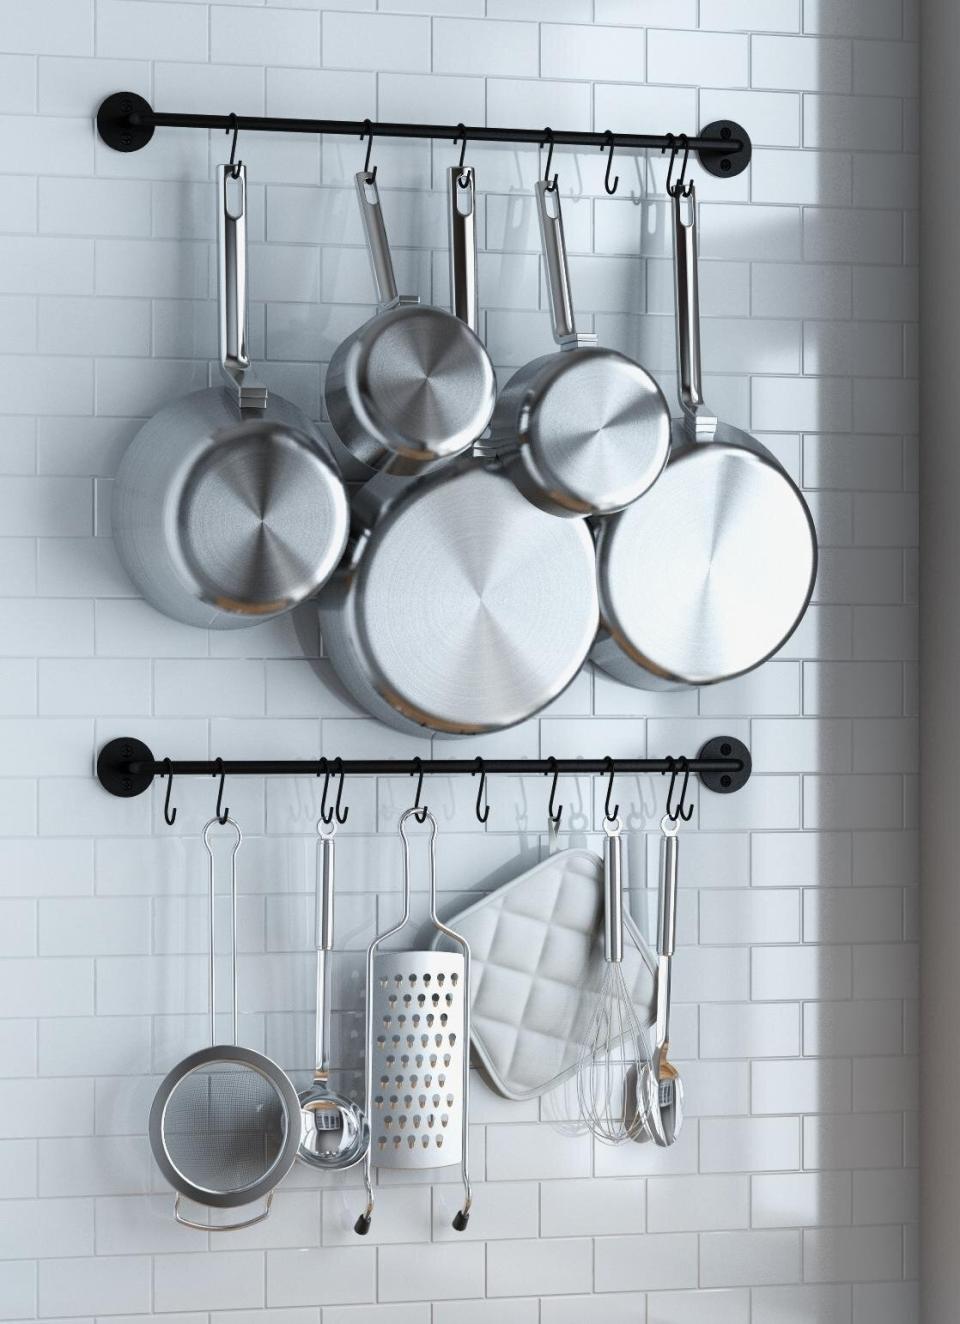 The pan rack mounted on tile with cookware hanging.